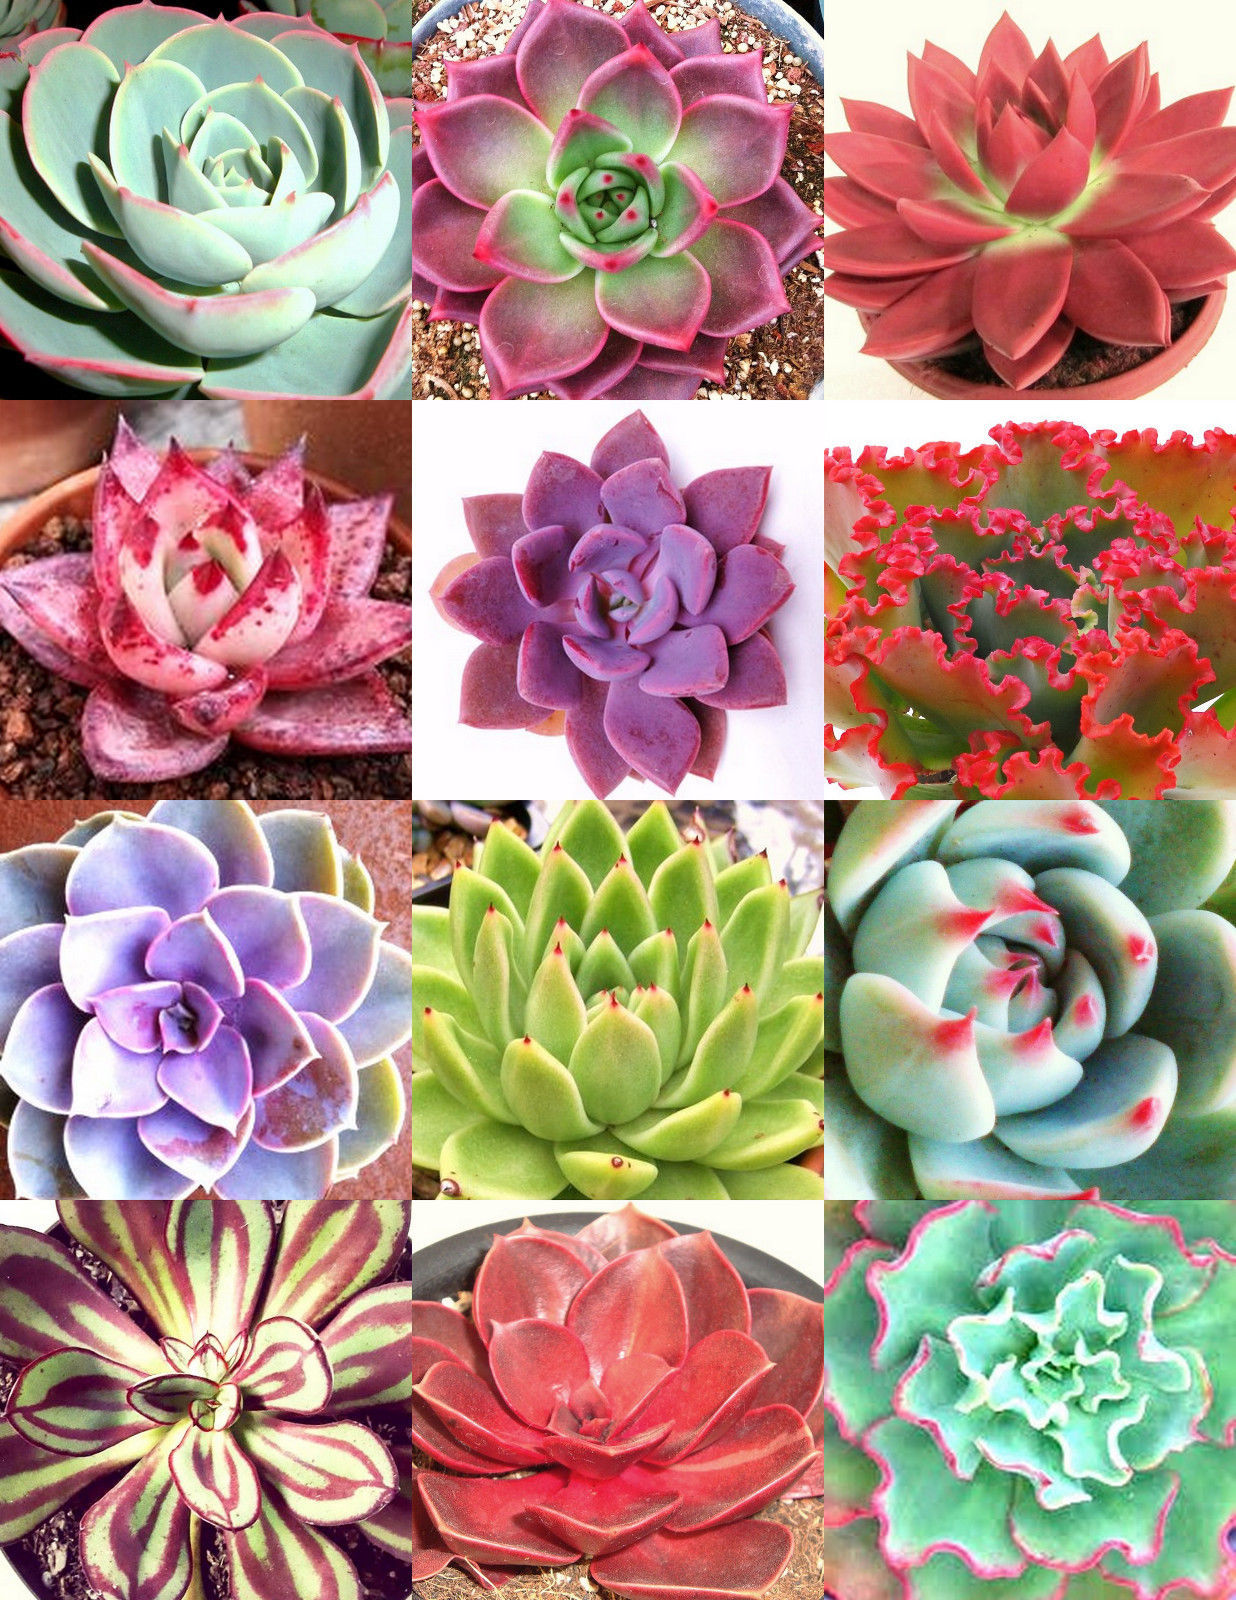 COLOR ECHEVERIA mix, rare exotic succulent HEN &CHICKS flowering seed ...